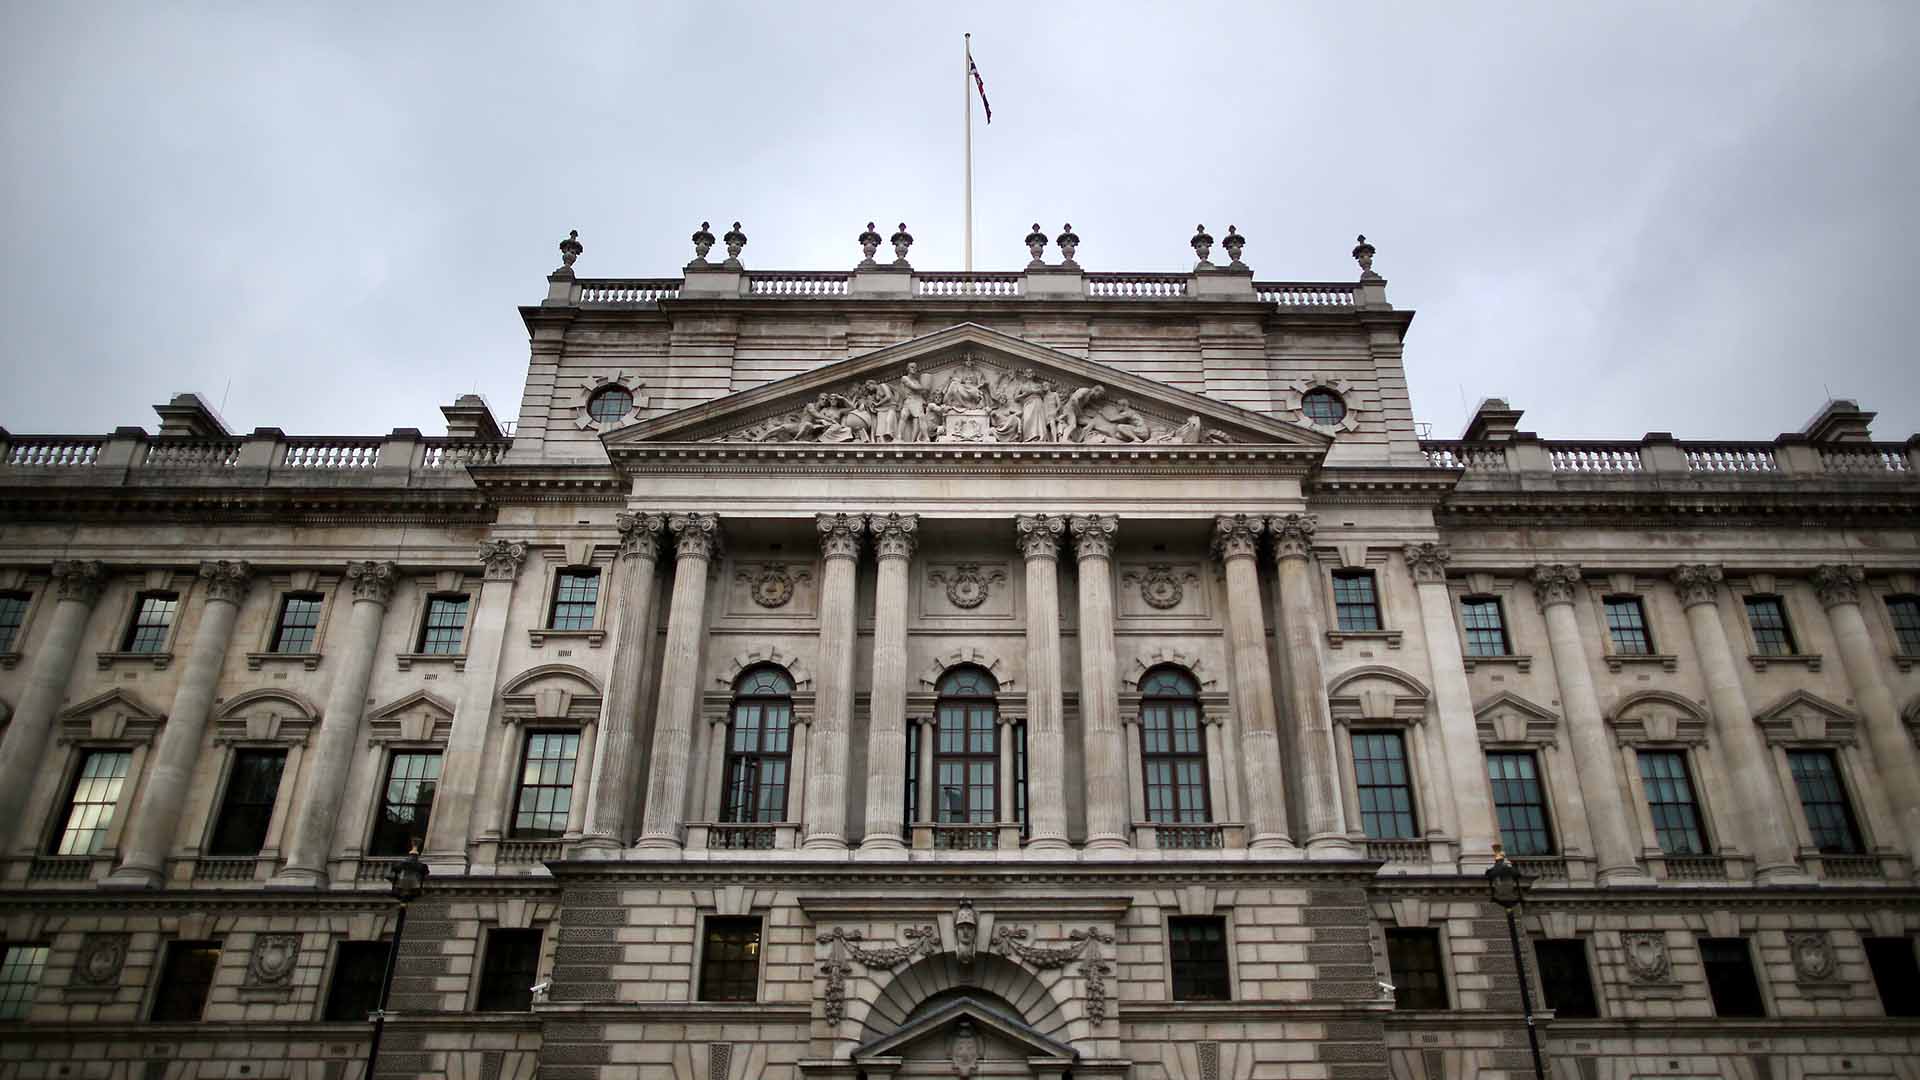 An image of the buildings of the U.K. tax authority